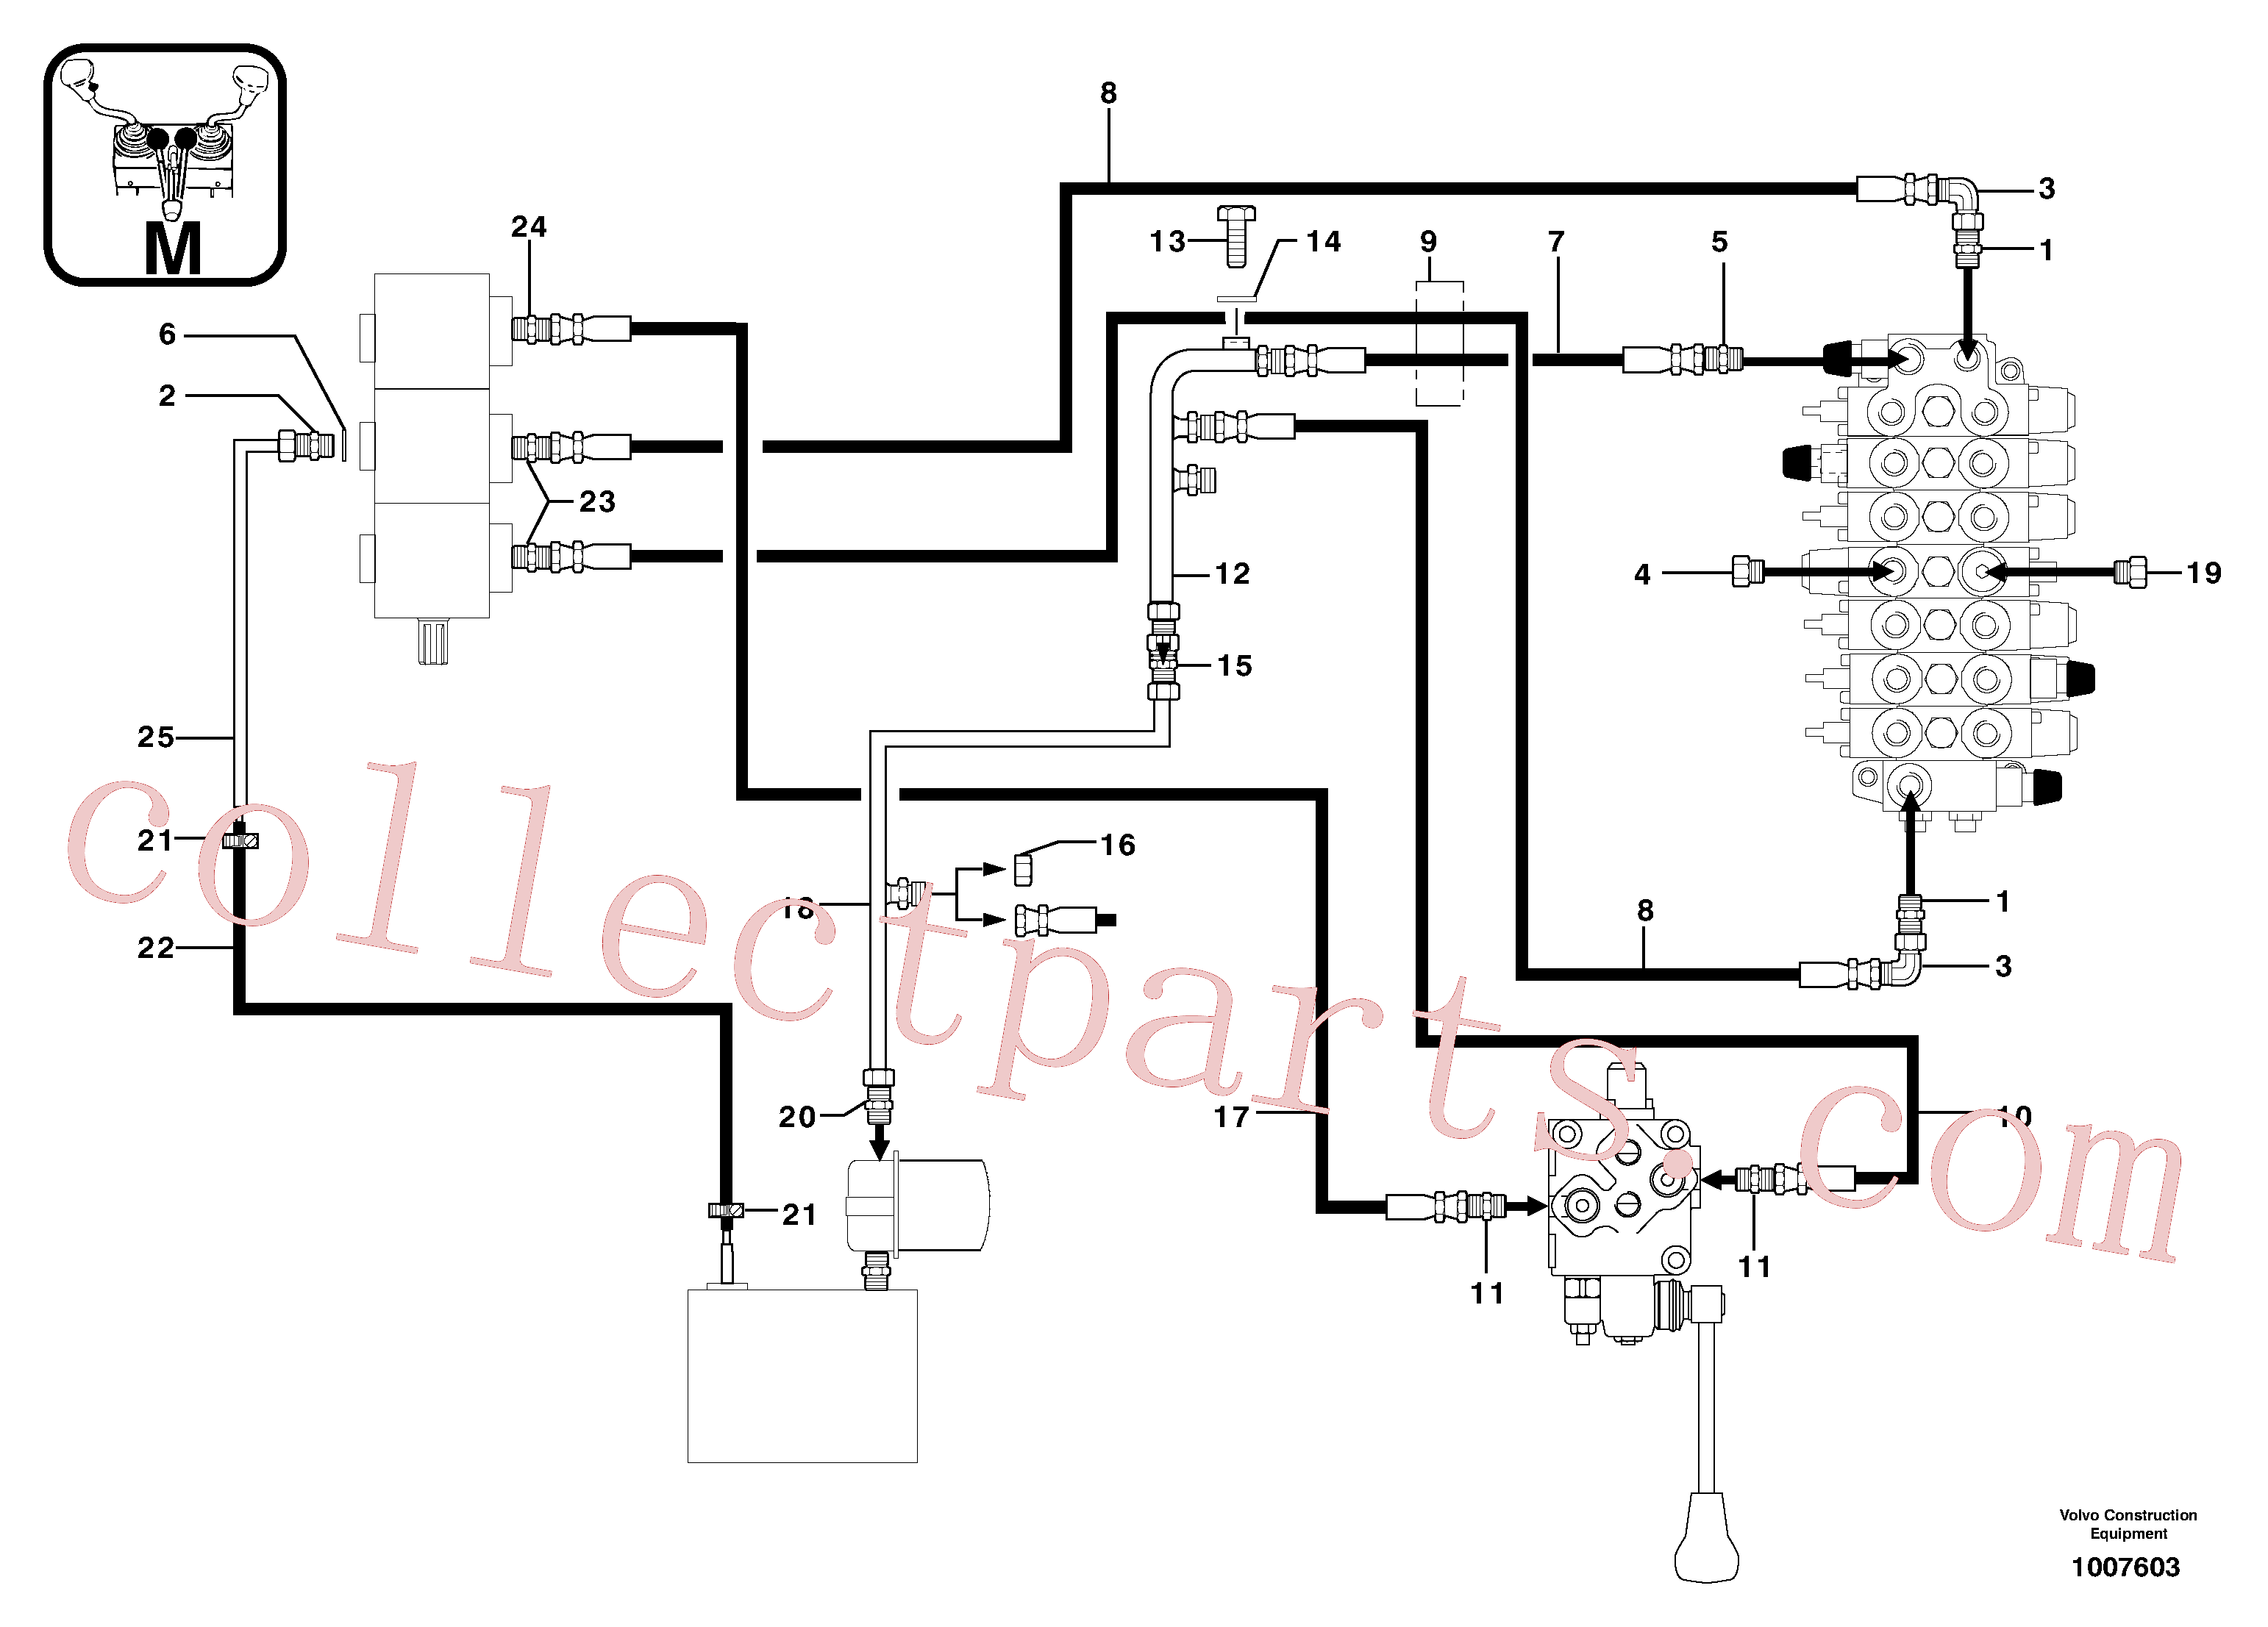 PJ5040052 for Volvo Attachments supply and return circuit(1007603 assembly)